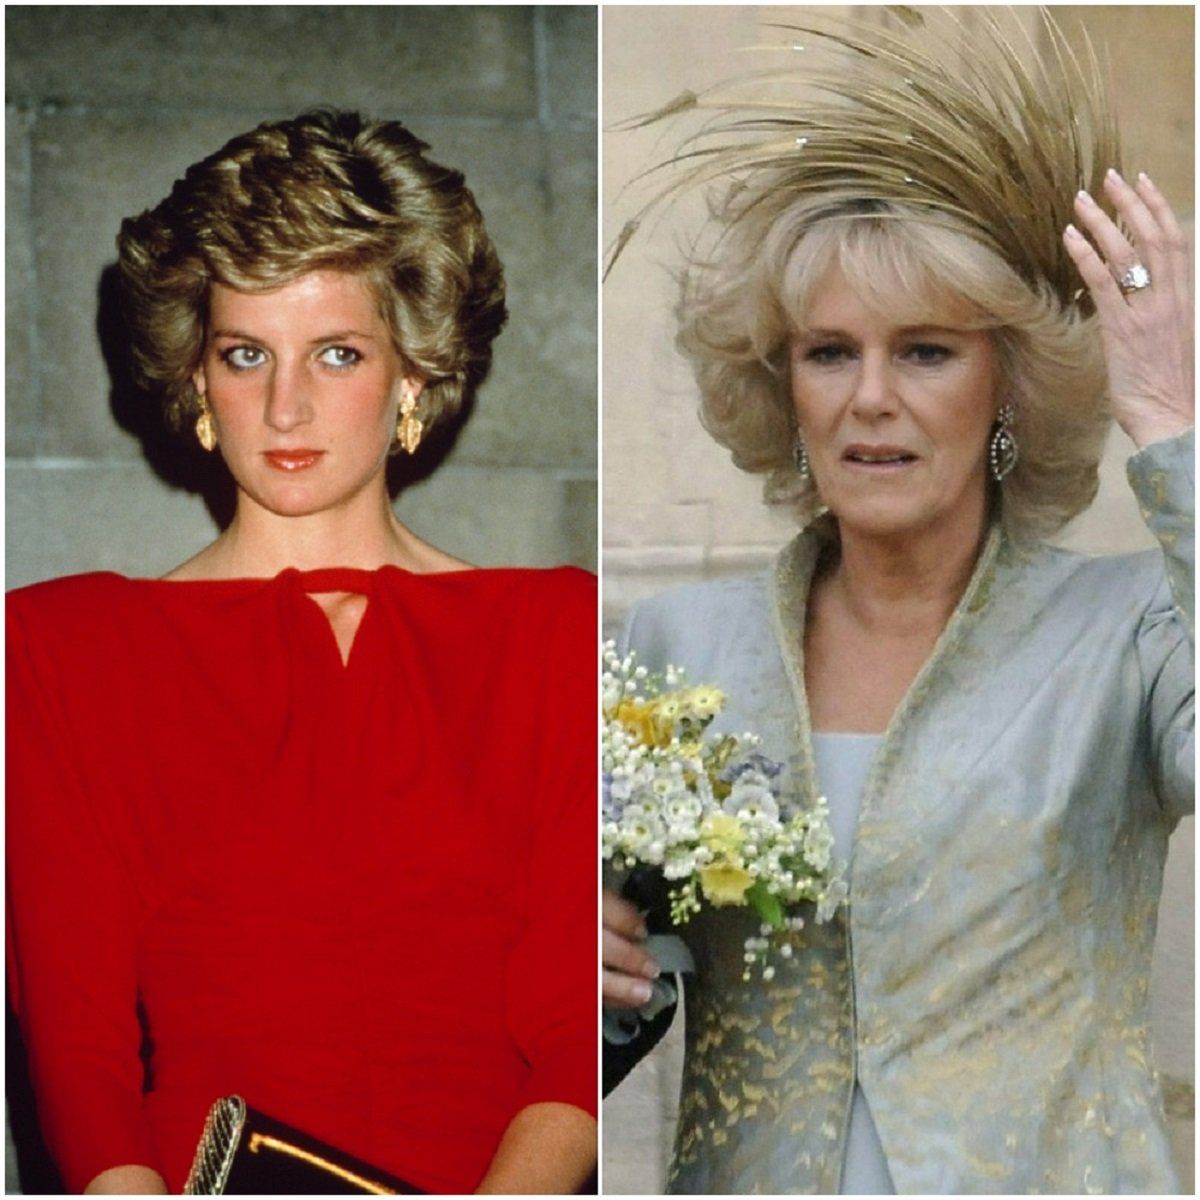 (L) Princess Diana dressed in red at a state reception in Australia, (R) Camilla Parker Bowles leaving St. George's Chapel after the blessing of civil marriage to Prince Charles